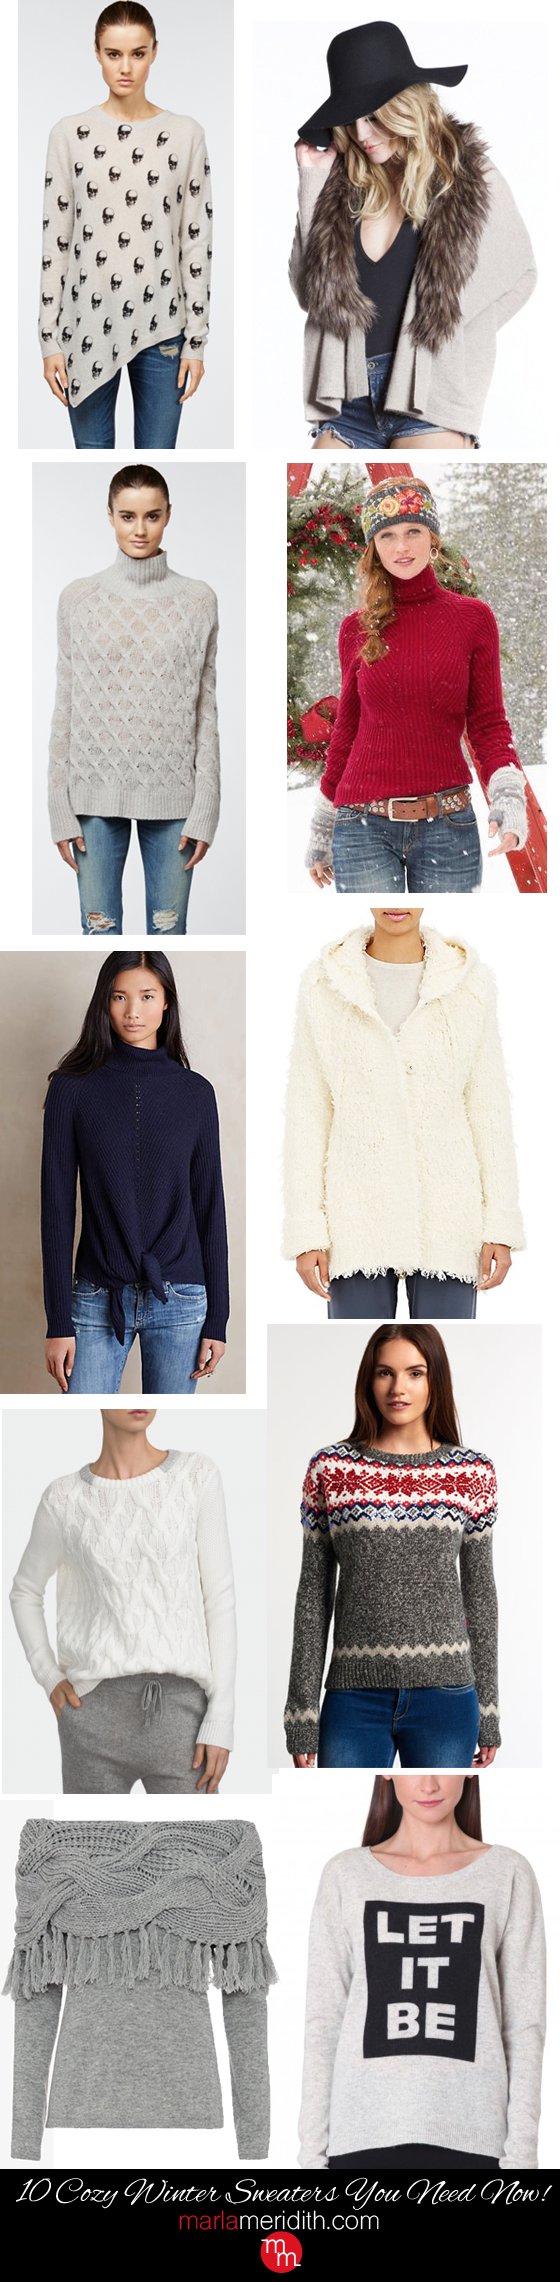 10 Cozy Winter Sweaters You Need Now! Stay warm, comfy & fashionable! MarlaMeridith.com ( @marlameridith )